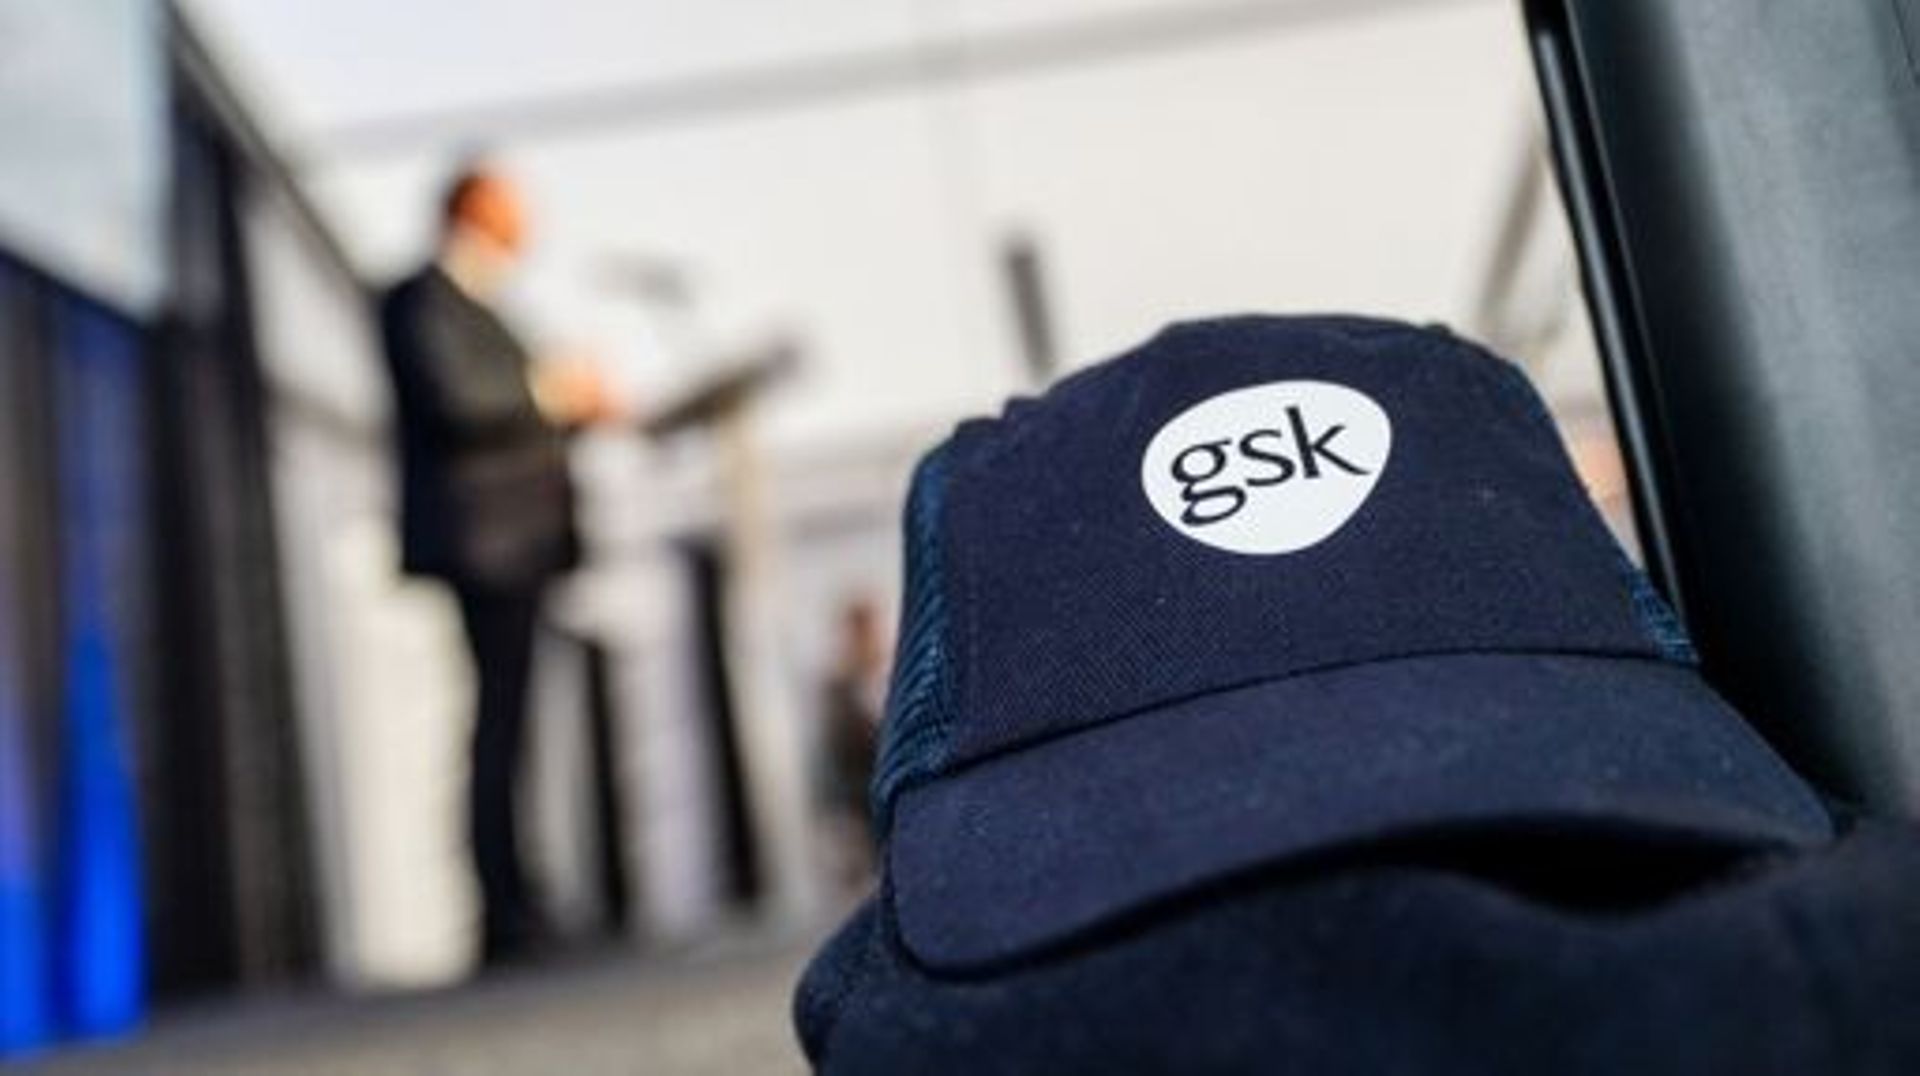 Illustration picture shows the GSK logo on a cap during the placement of the first pillar of the future GSK pharmaceutical logistics hub in Gembloux, Tuesday 20 December 2022. The future logistics center will have an impressive storage space for vaccines.